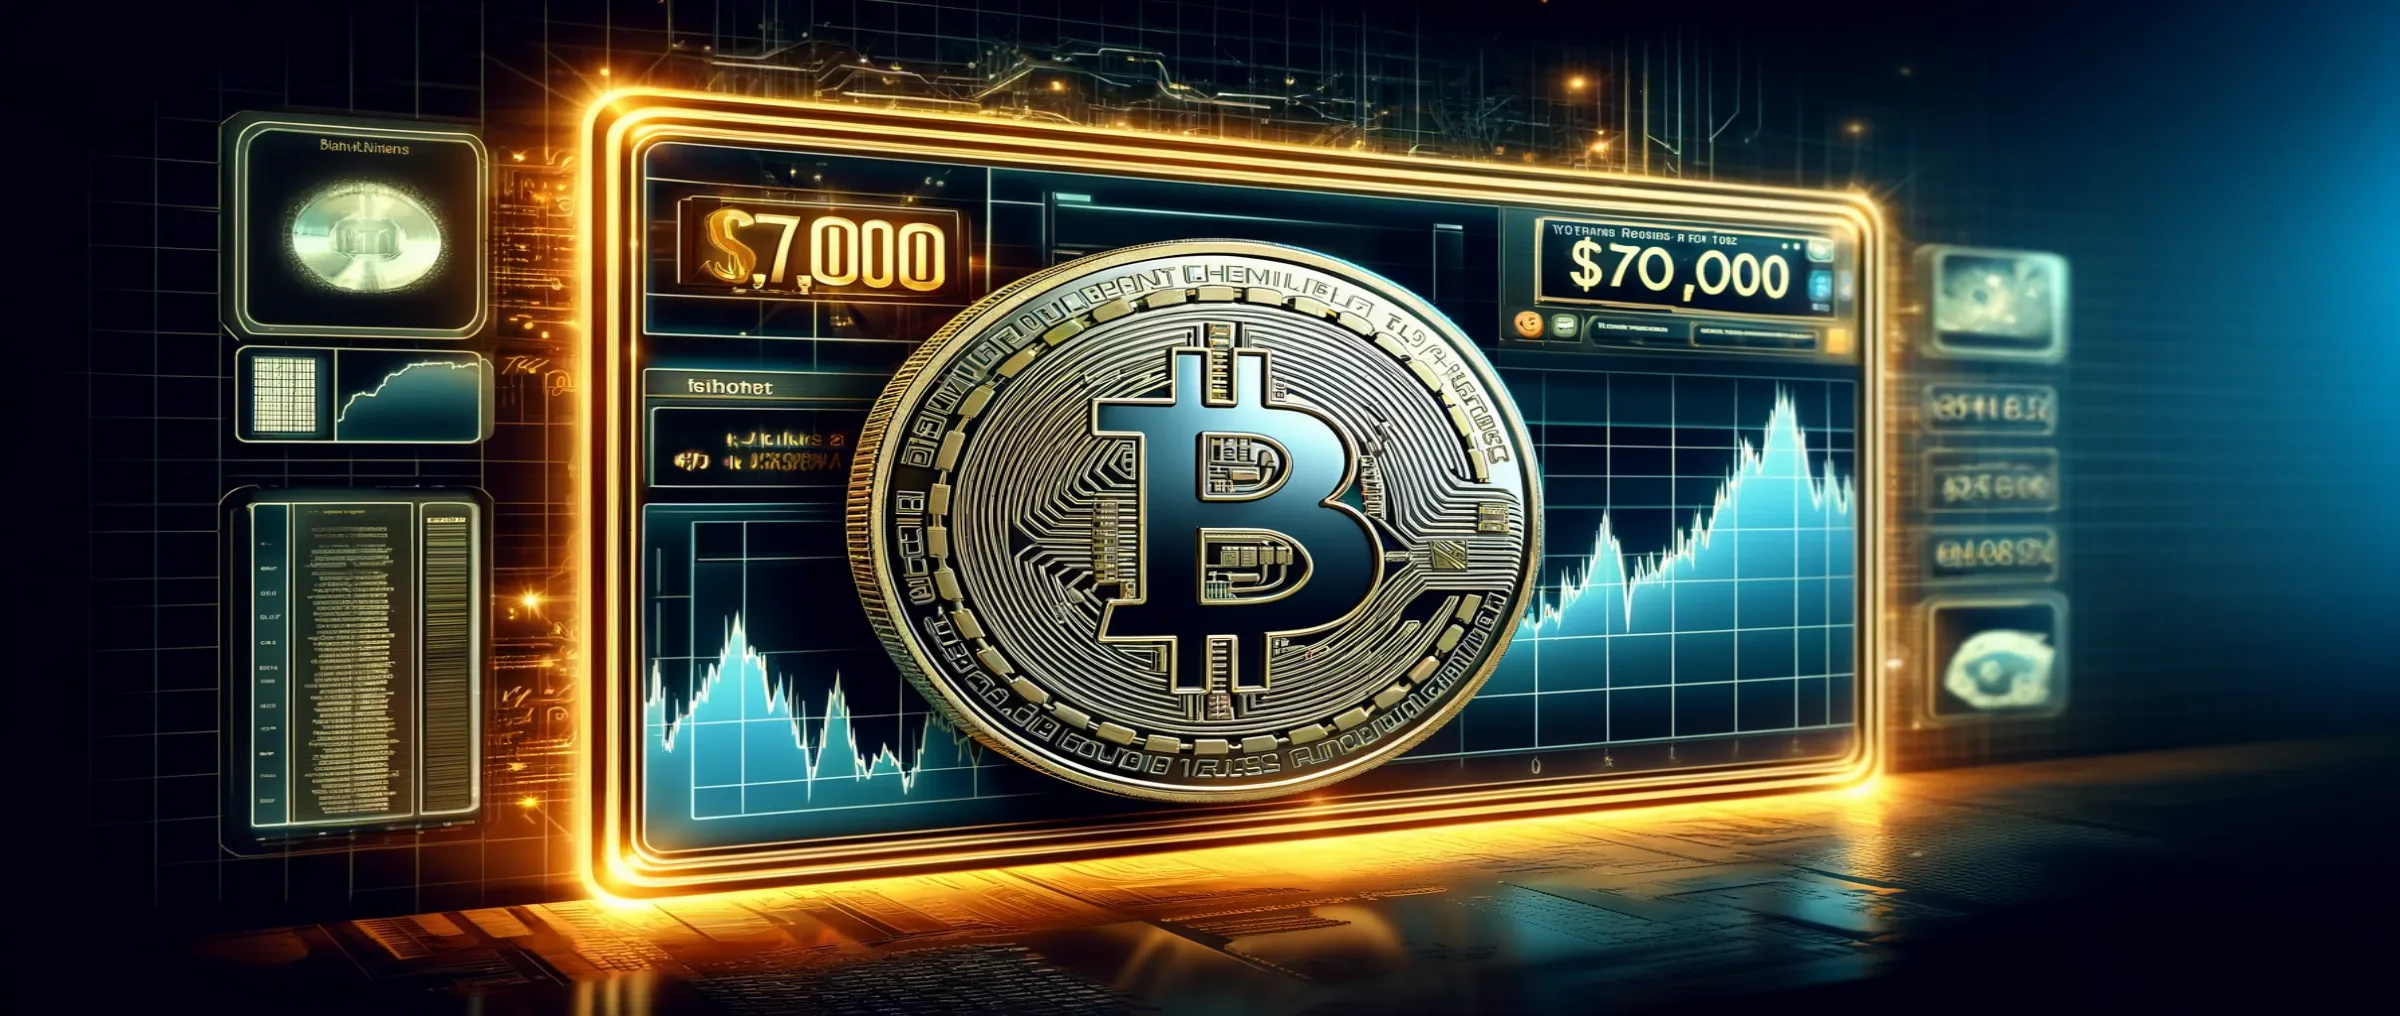 The price of Bitcoin is holding steady at $70,000.